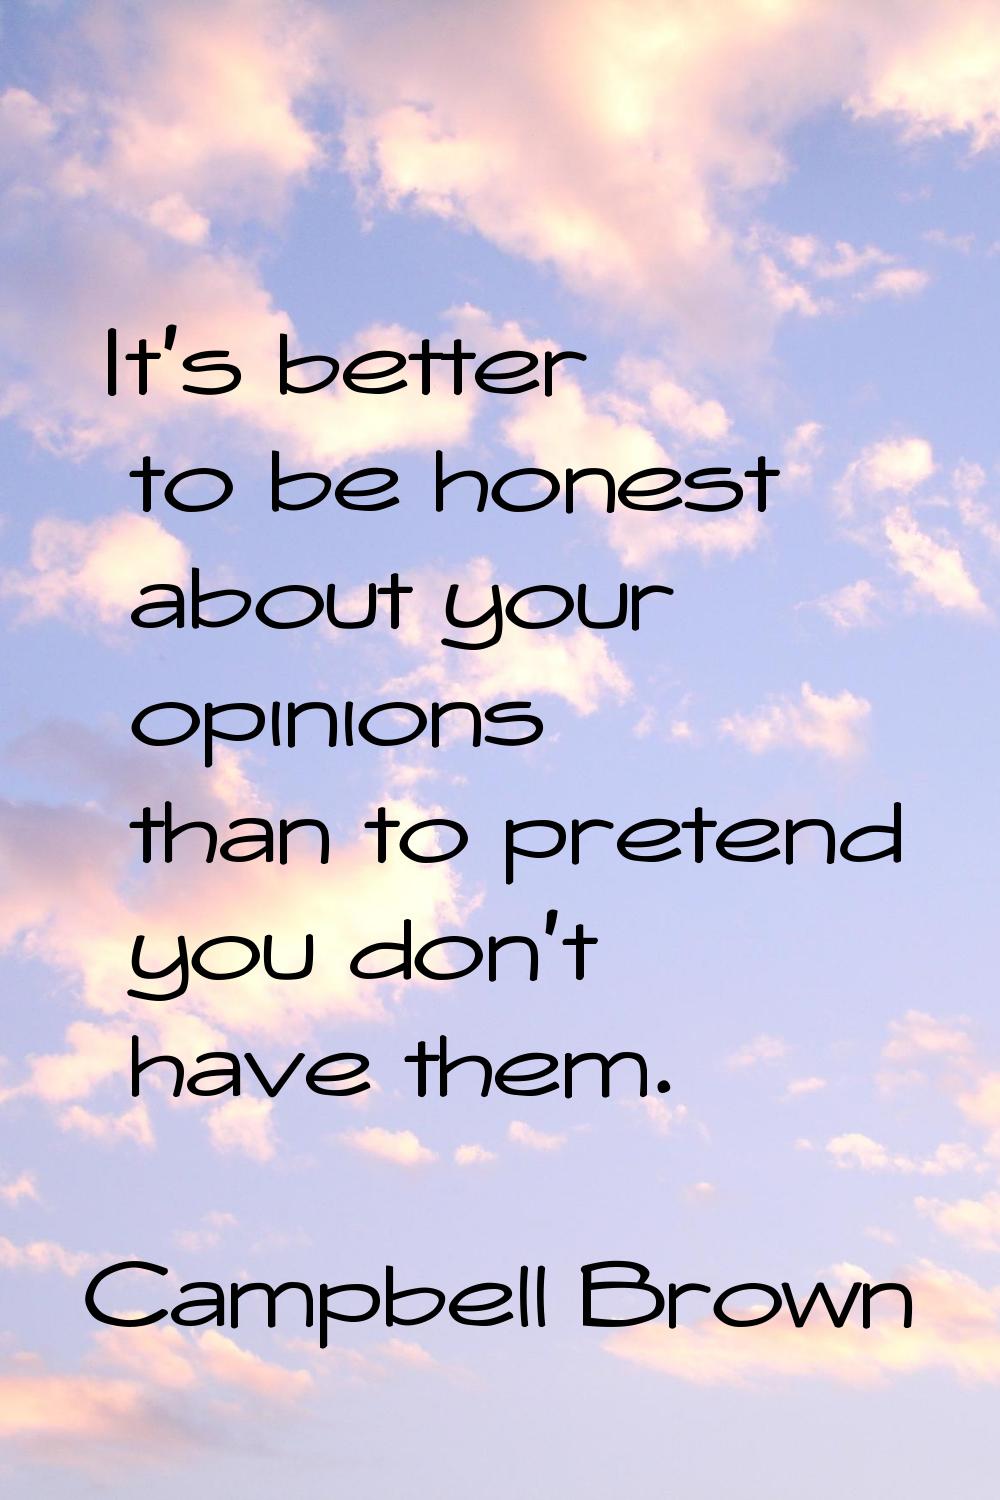 It's better to be honest about your opinions than to pretend you don't have them.